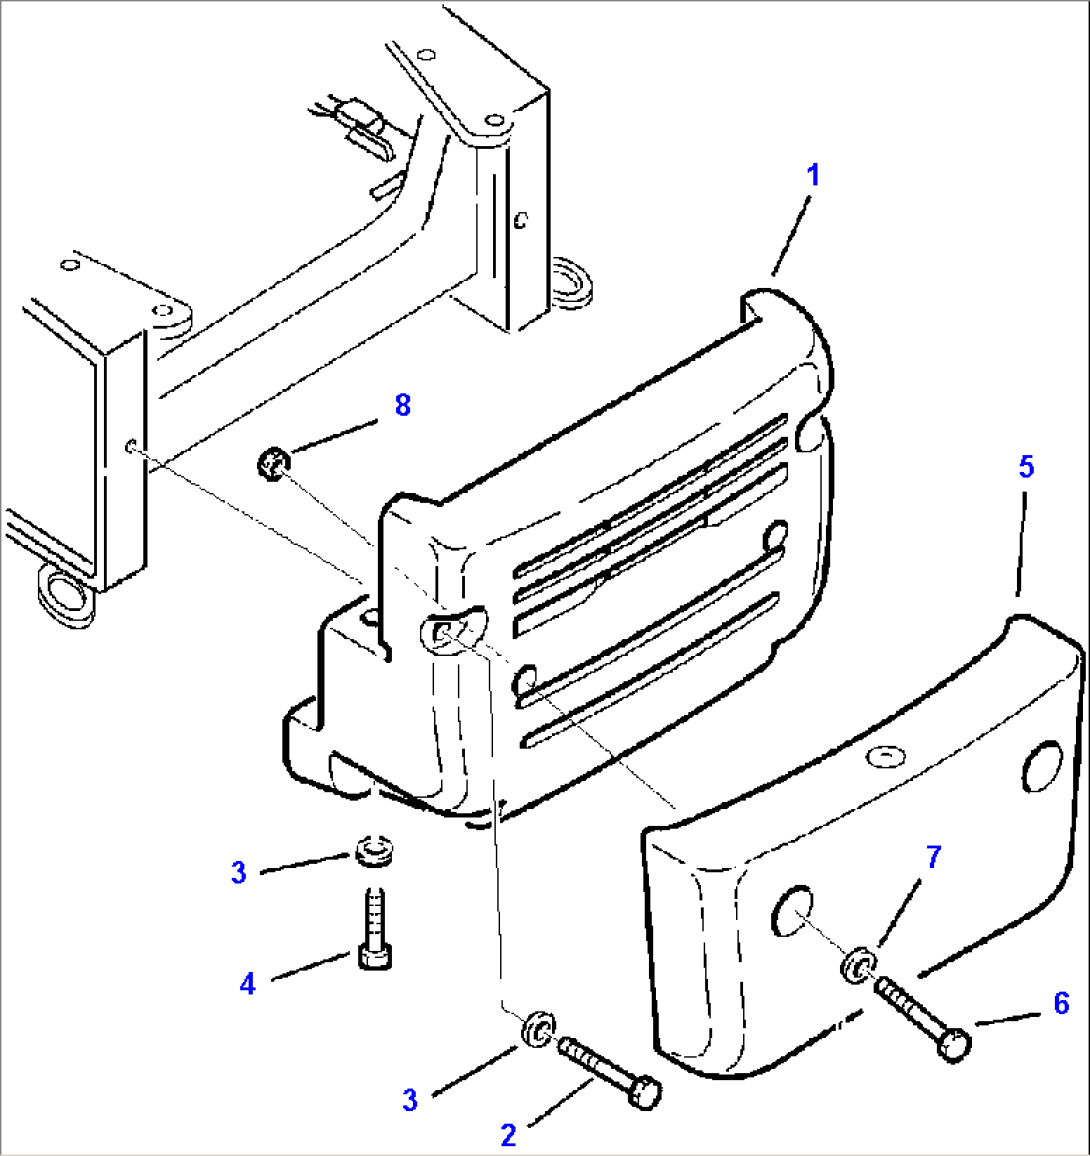 FIG. M5010-01A0 COUNTERWEIGHTS